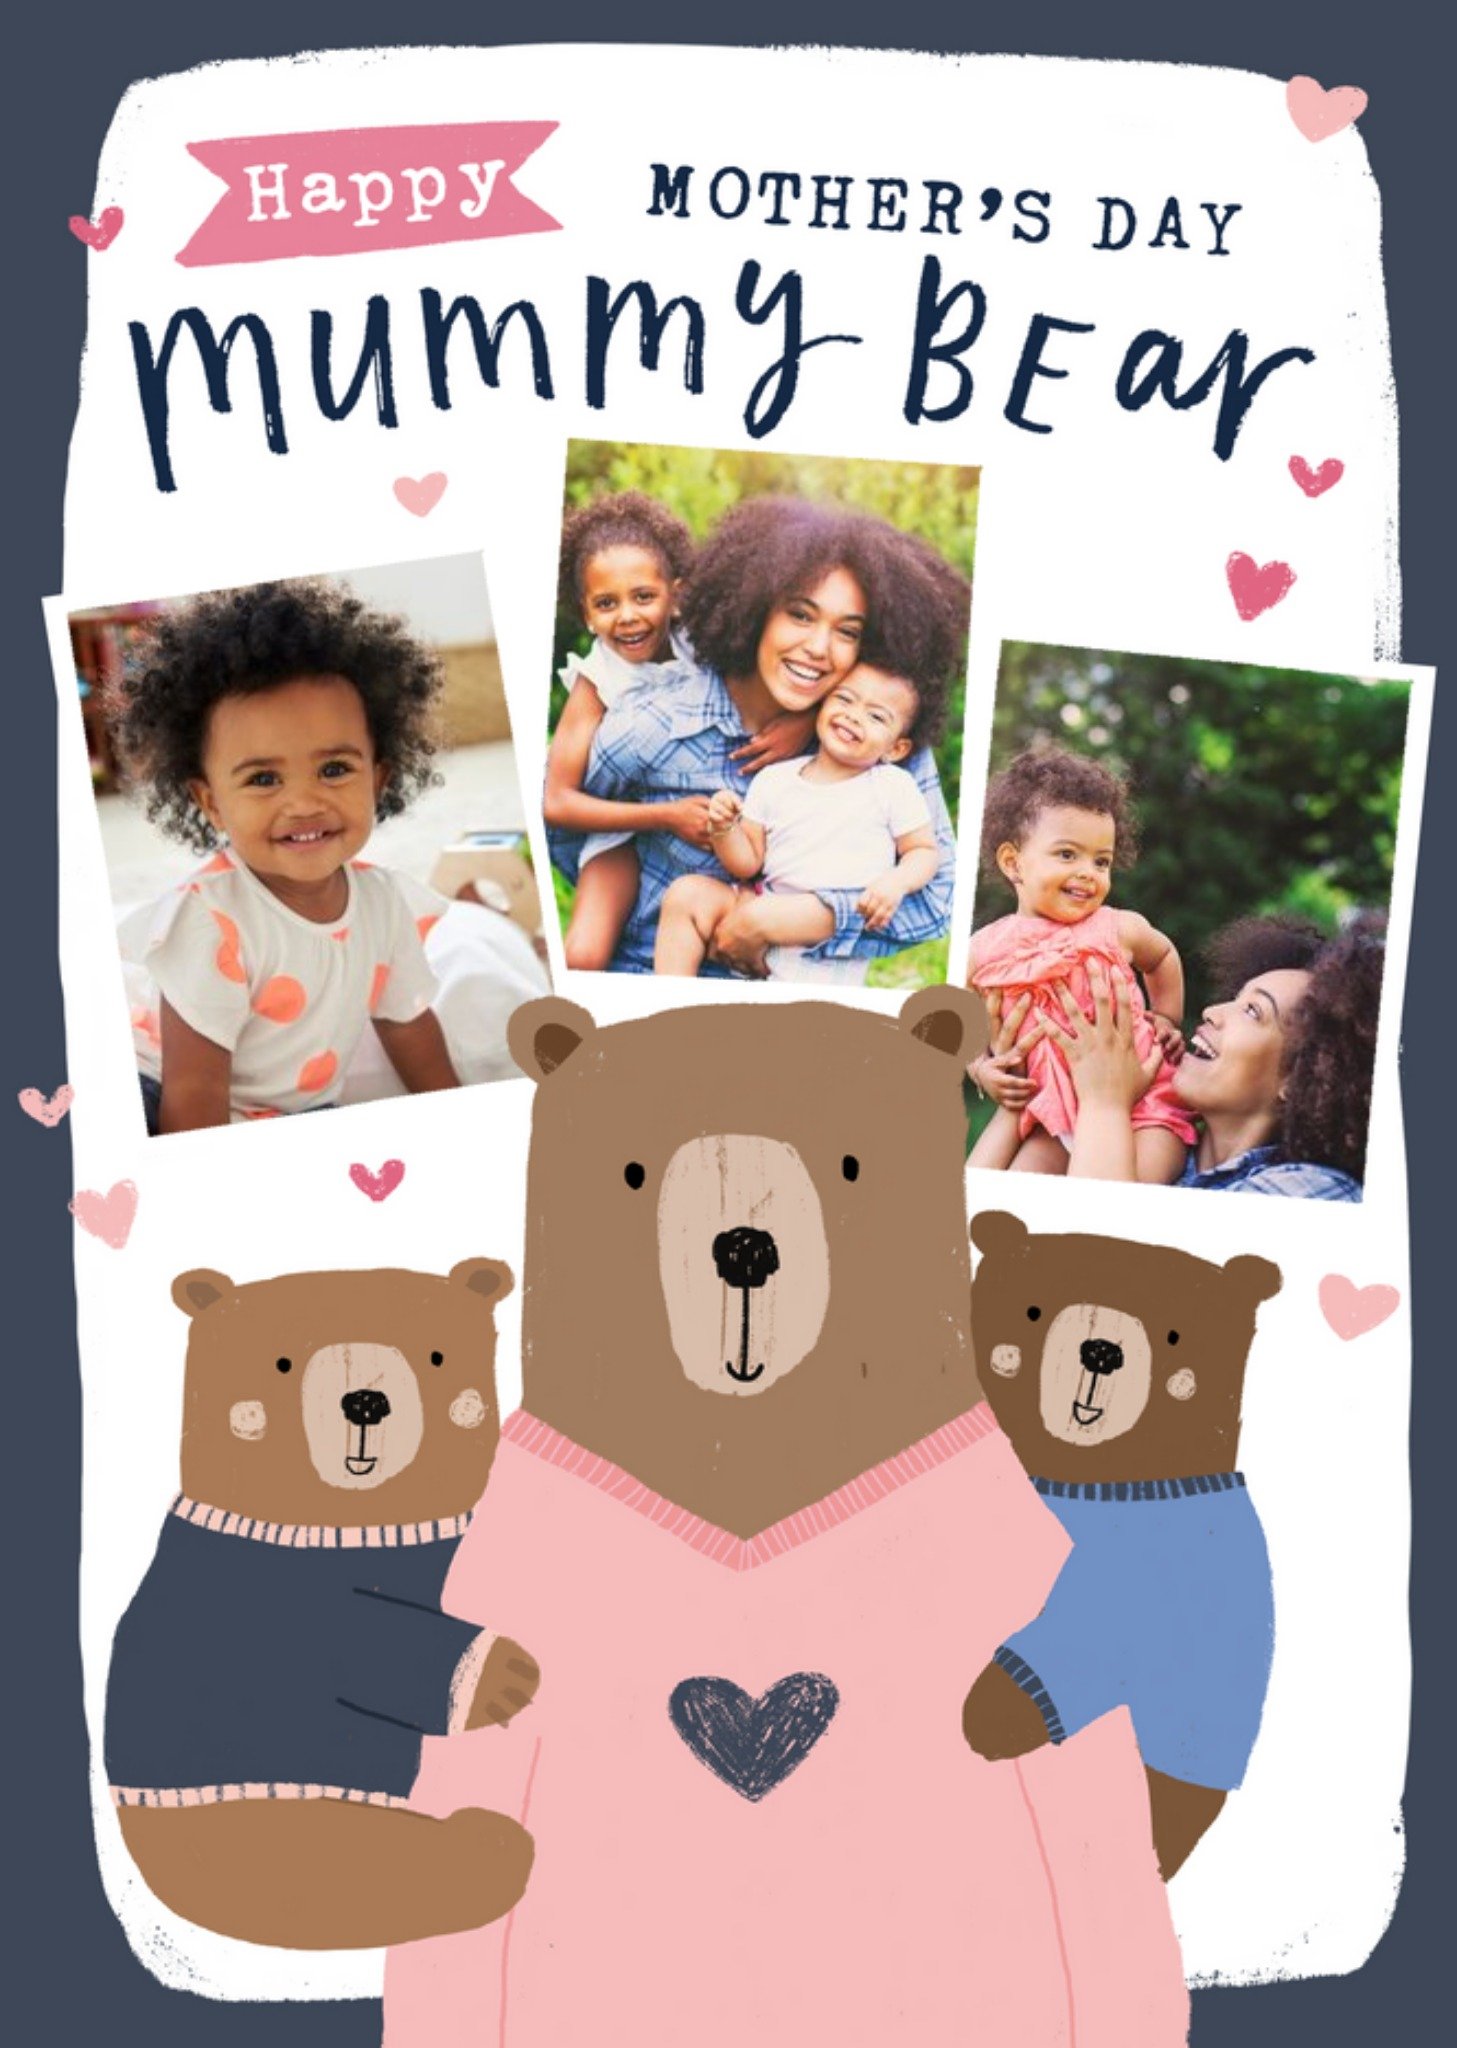 Moonpig Beary Lovely Happy Mothers Day Mummy Bear Photo Upload Mothers Day Card, Large